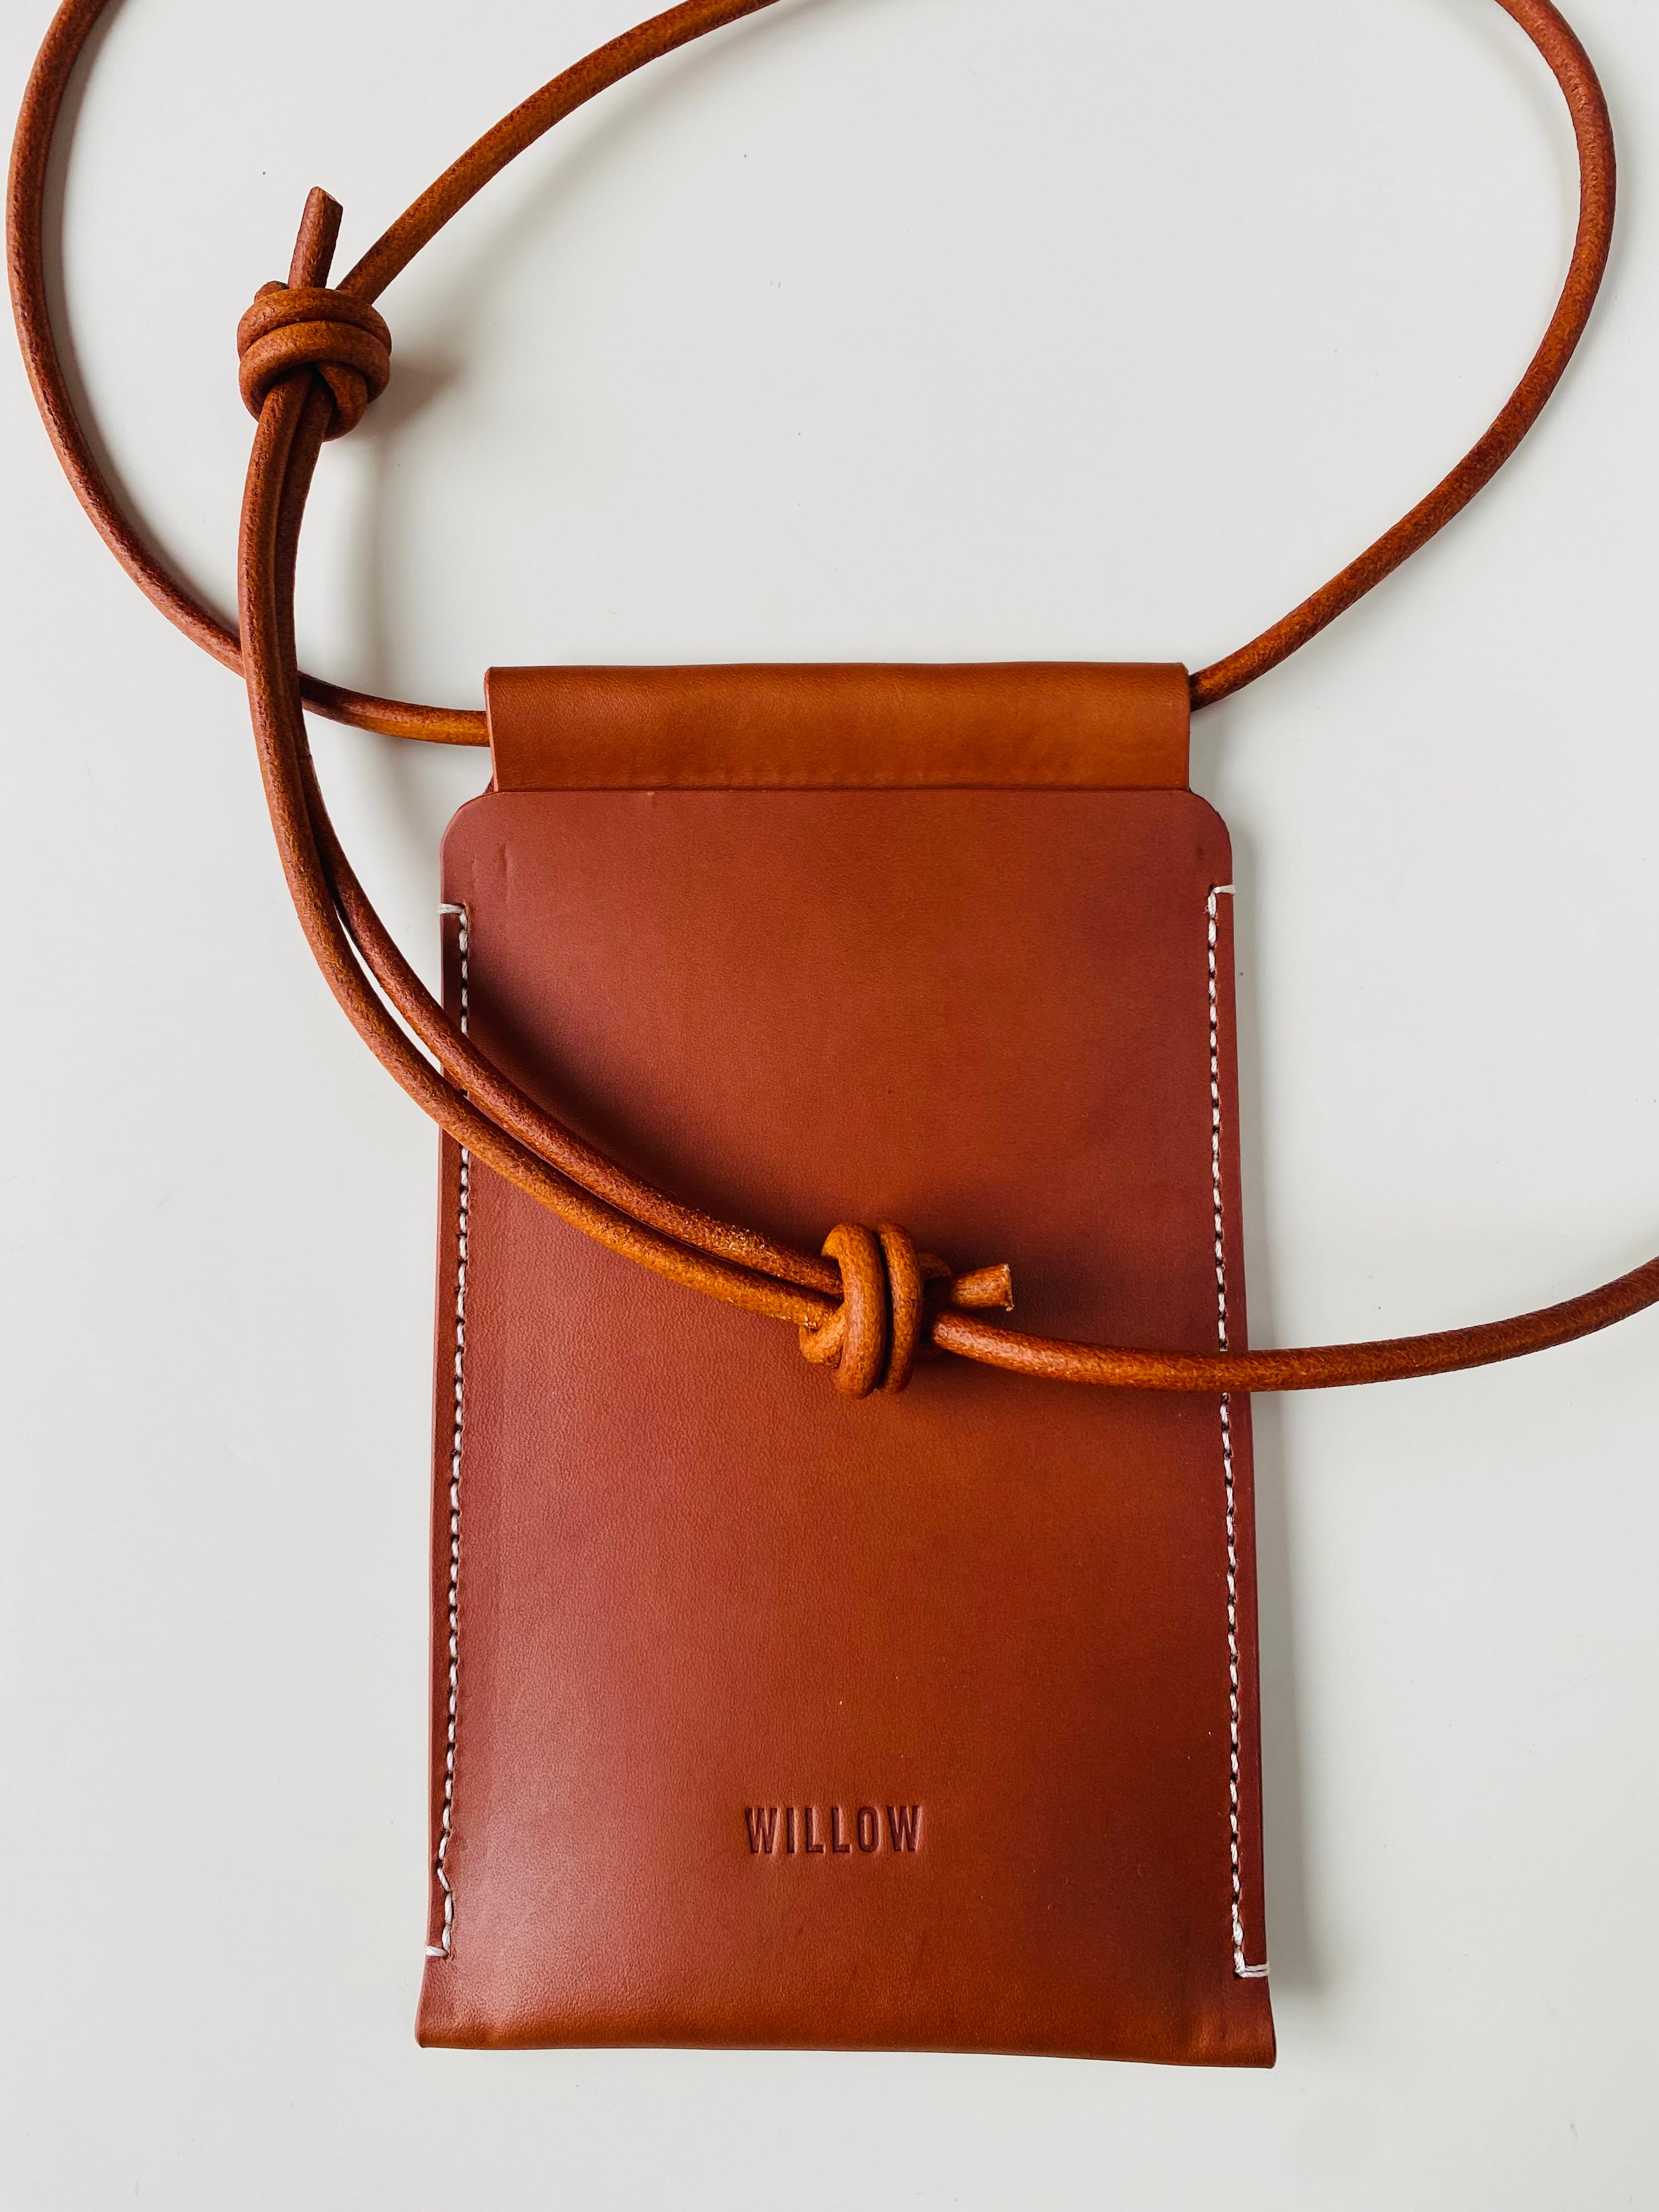 Handmade Leather Phone Carrier - Personalisation Available